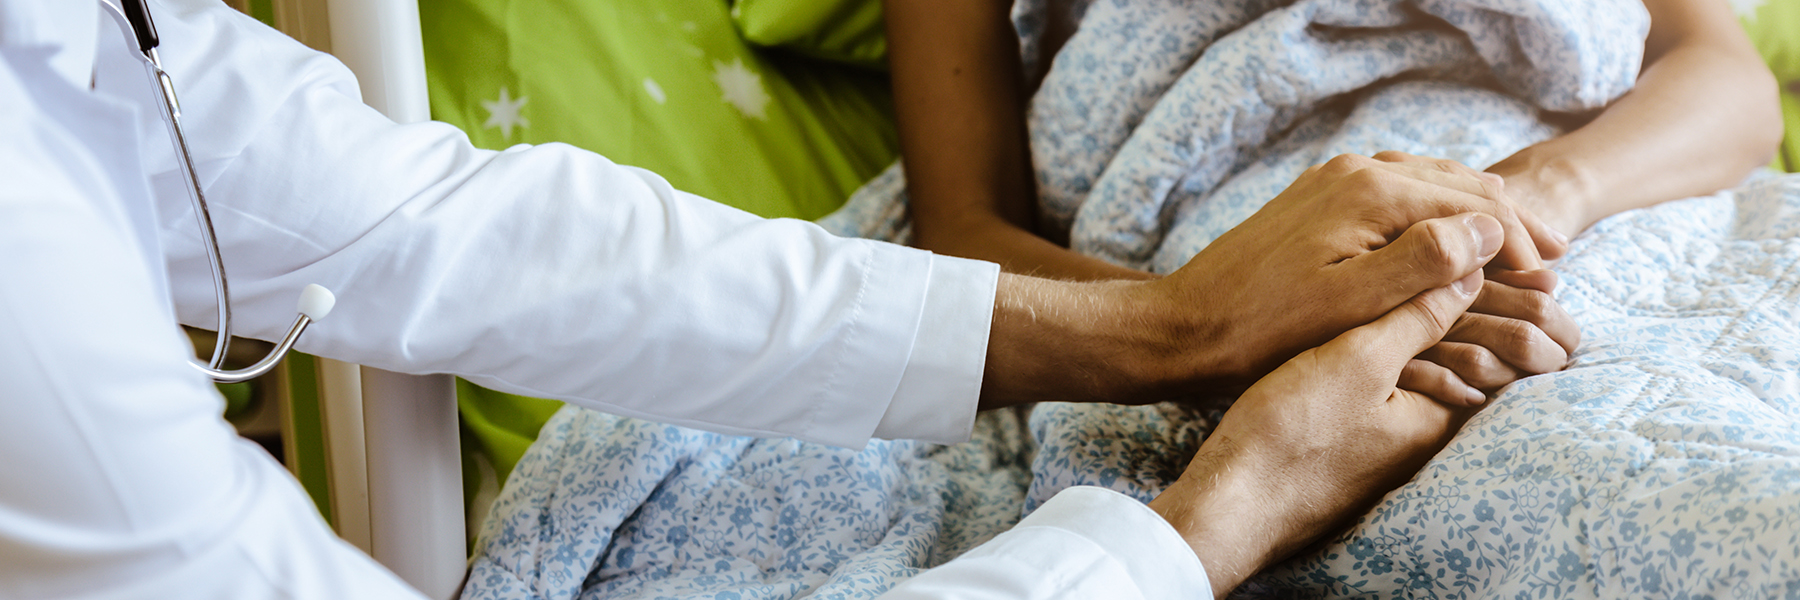 Healthcare provider holds the hand of a patient lying in a hospital bed. 